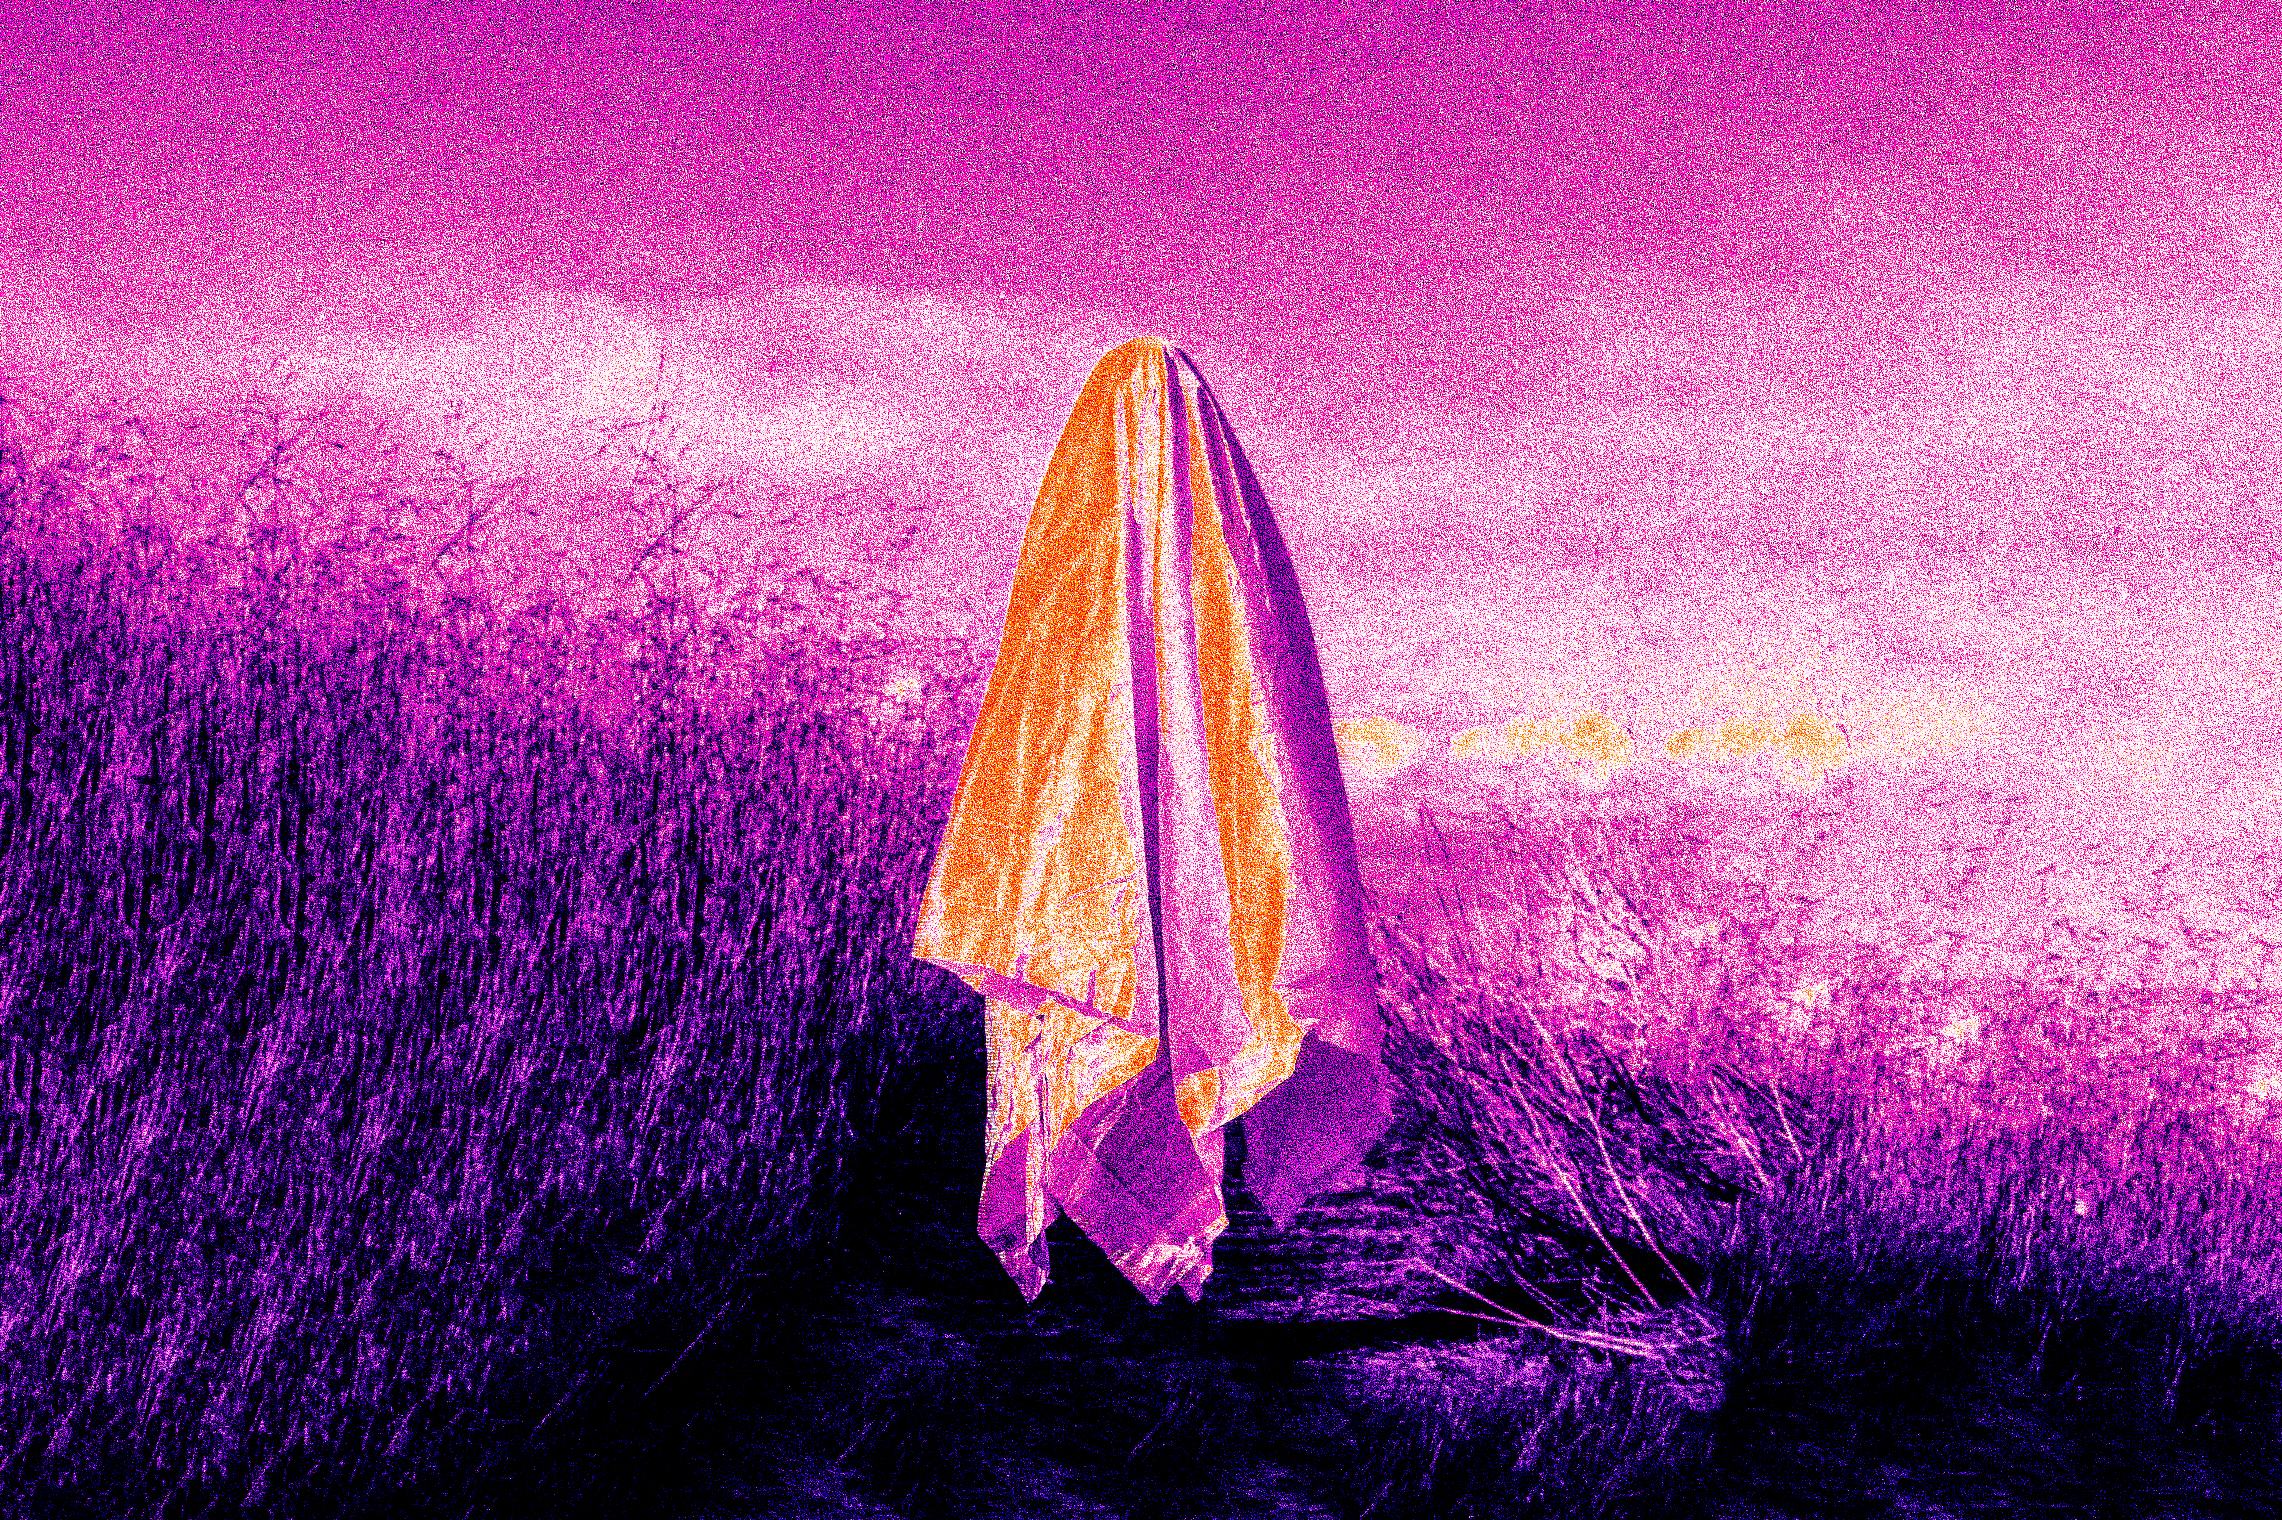 What Are Ghosts?  Catholic Answers Magazine